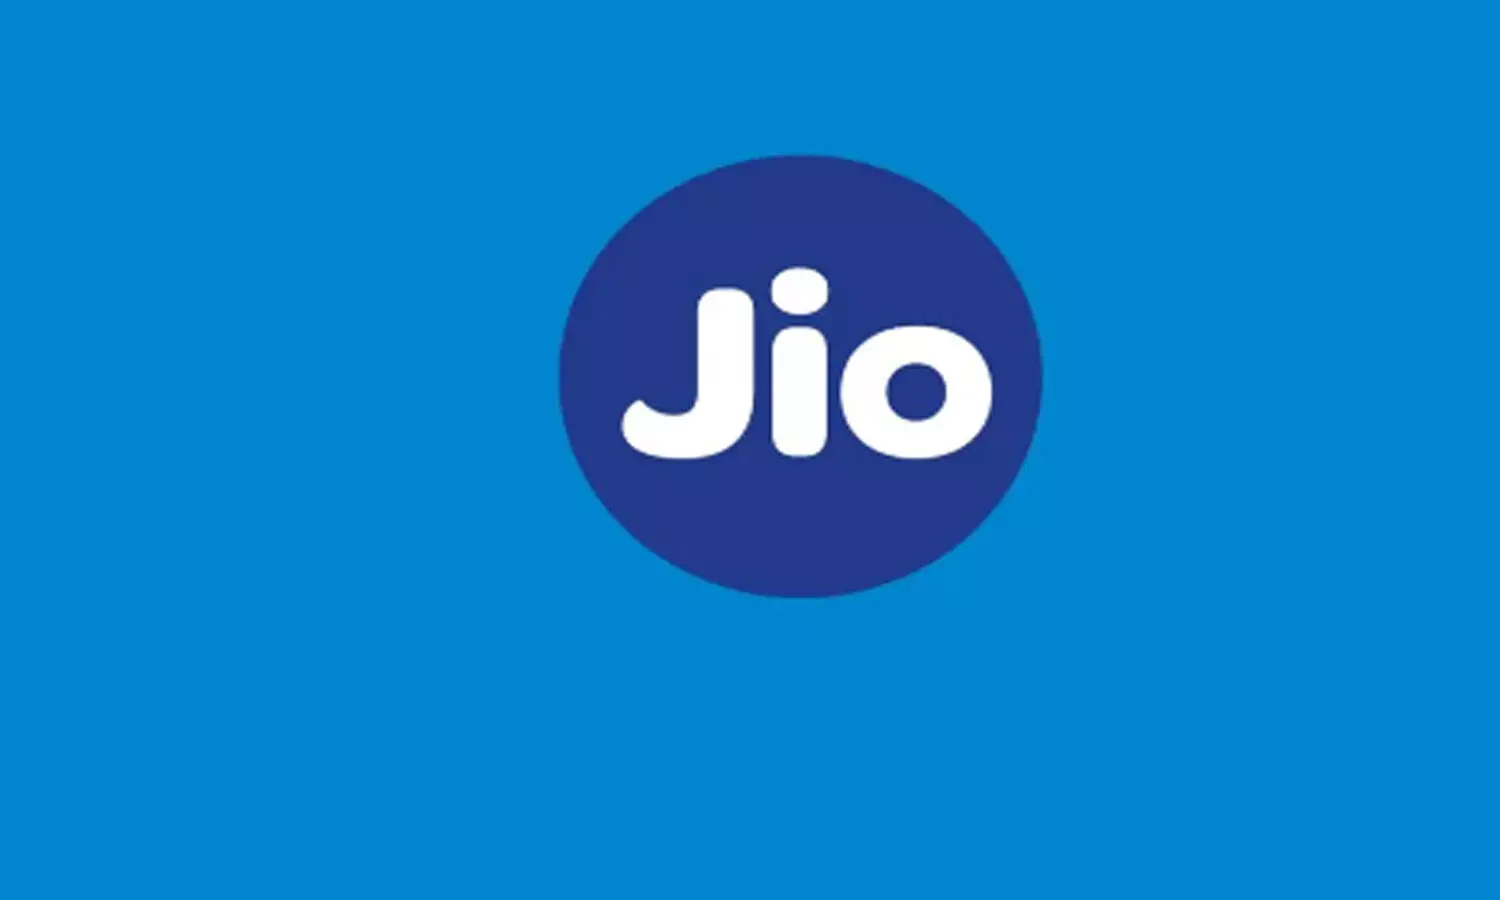 Jio is All Set to Launch Laptop JioBook